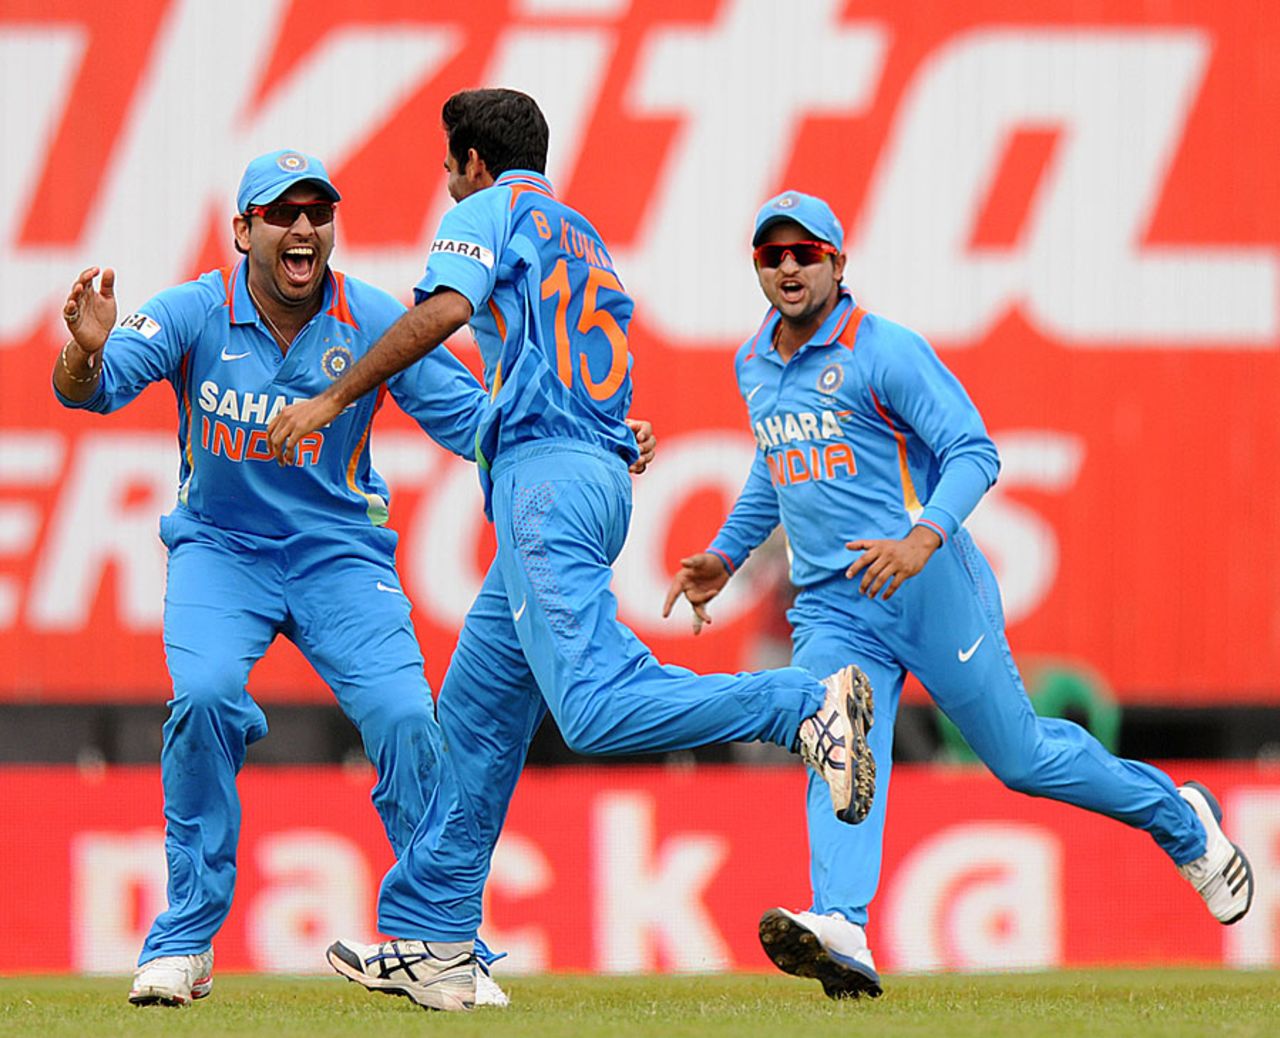 Indians celebrate after taking Mohammad Hafeez's wicket, India v Pakistan, 1st ODI, Chennai, December 30, 2012